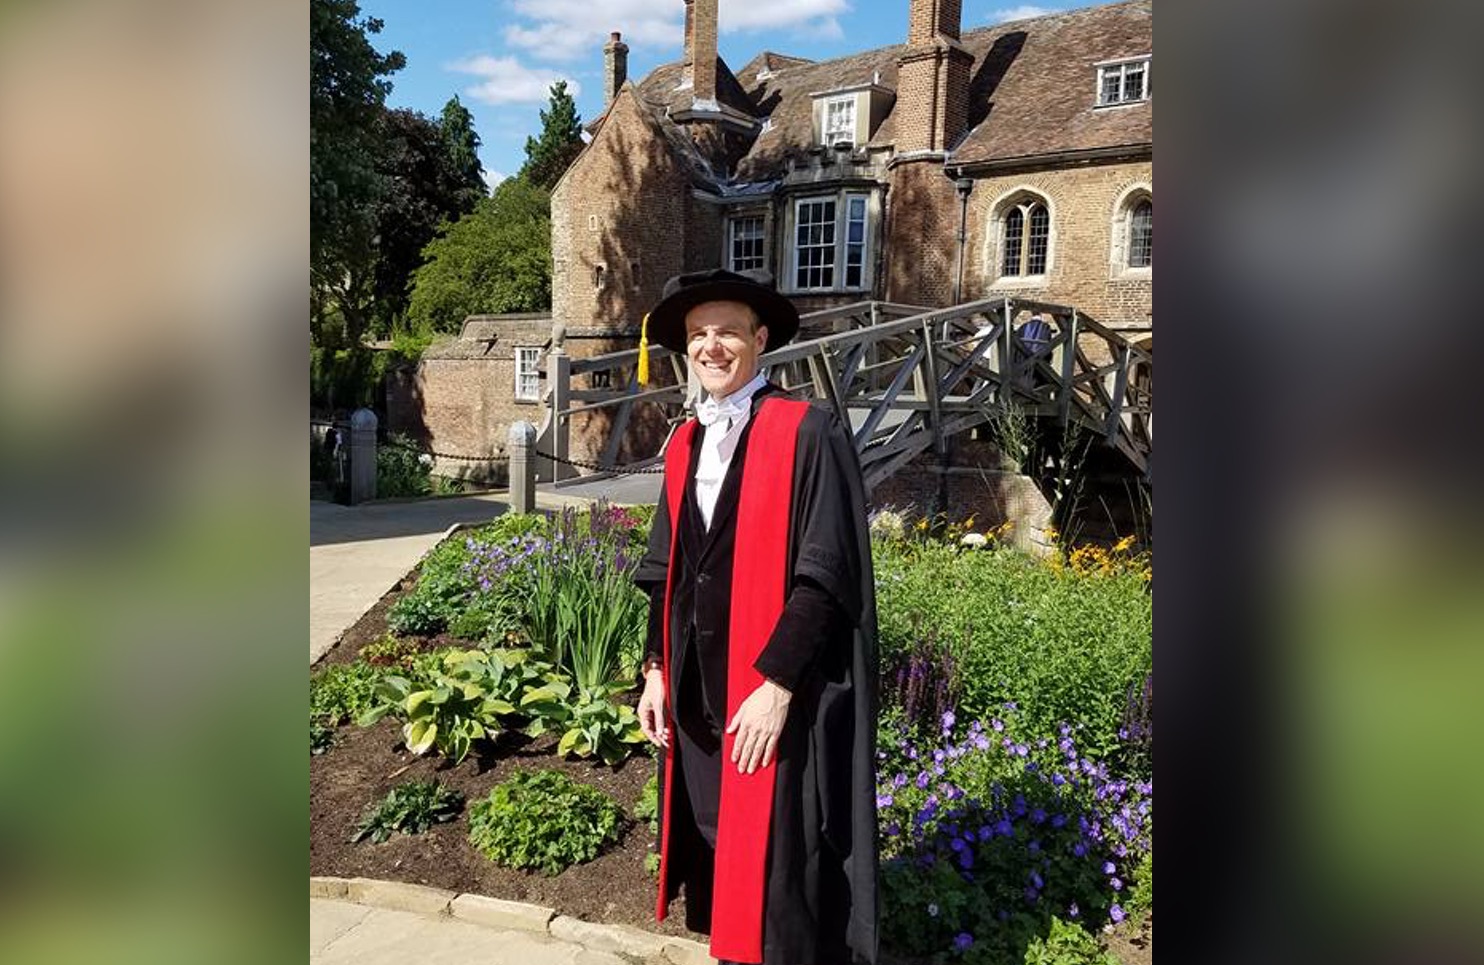 Kester's PhD graduation from the University of Cambridge in 2017